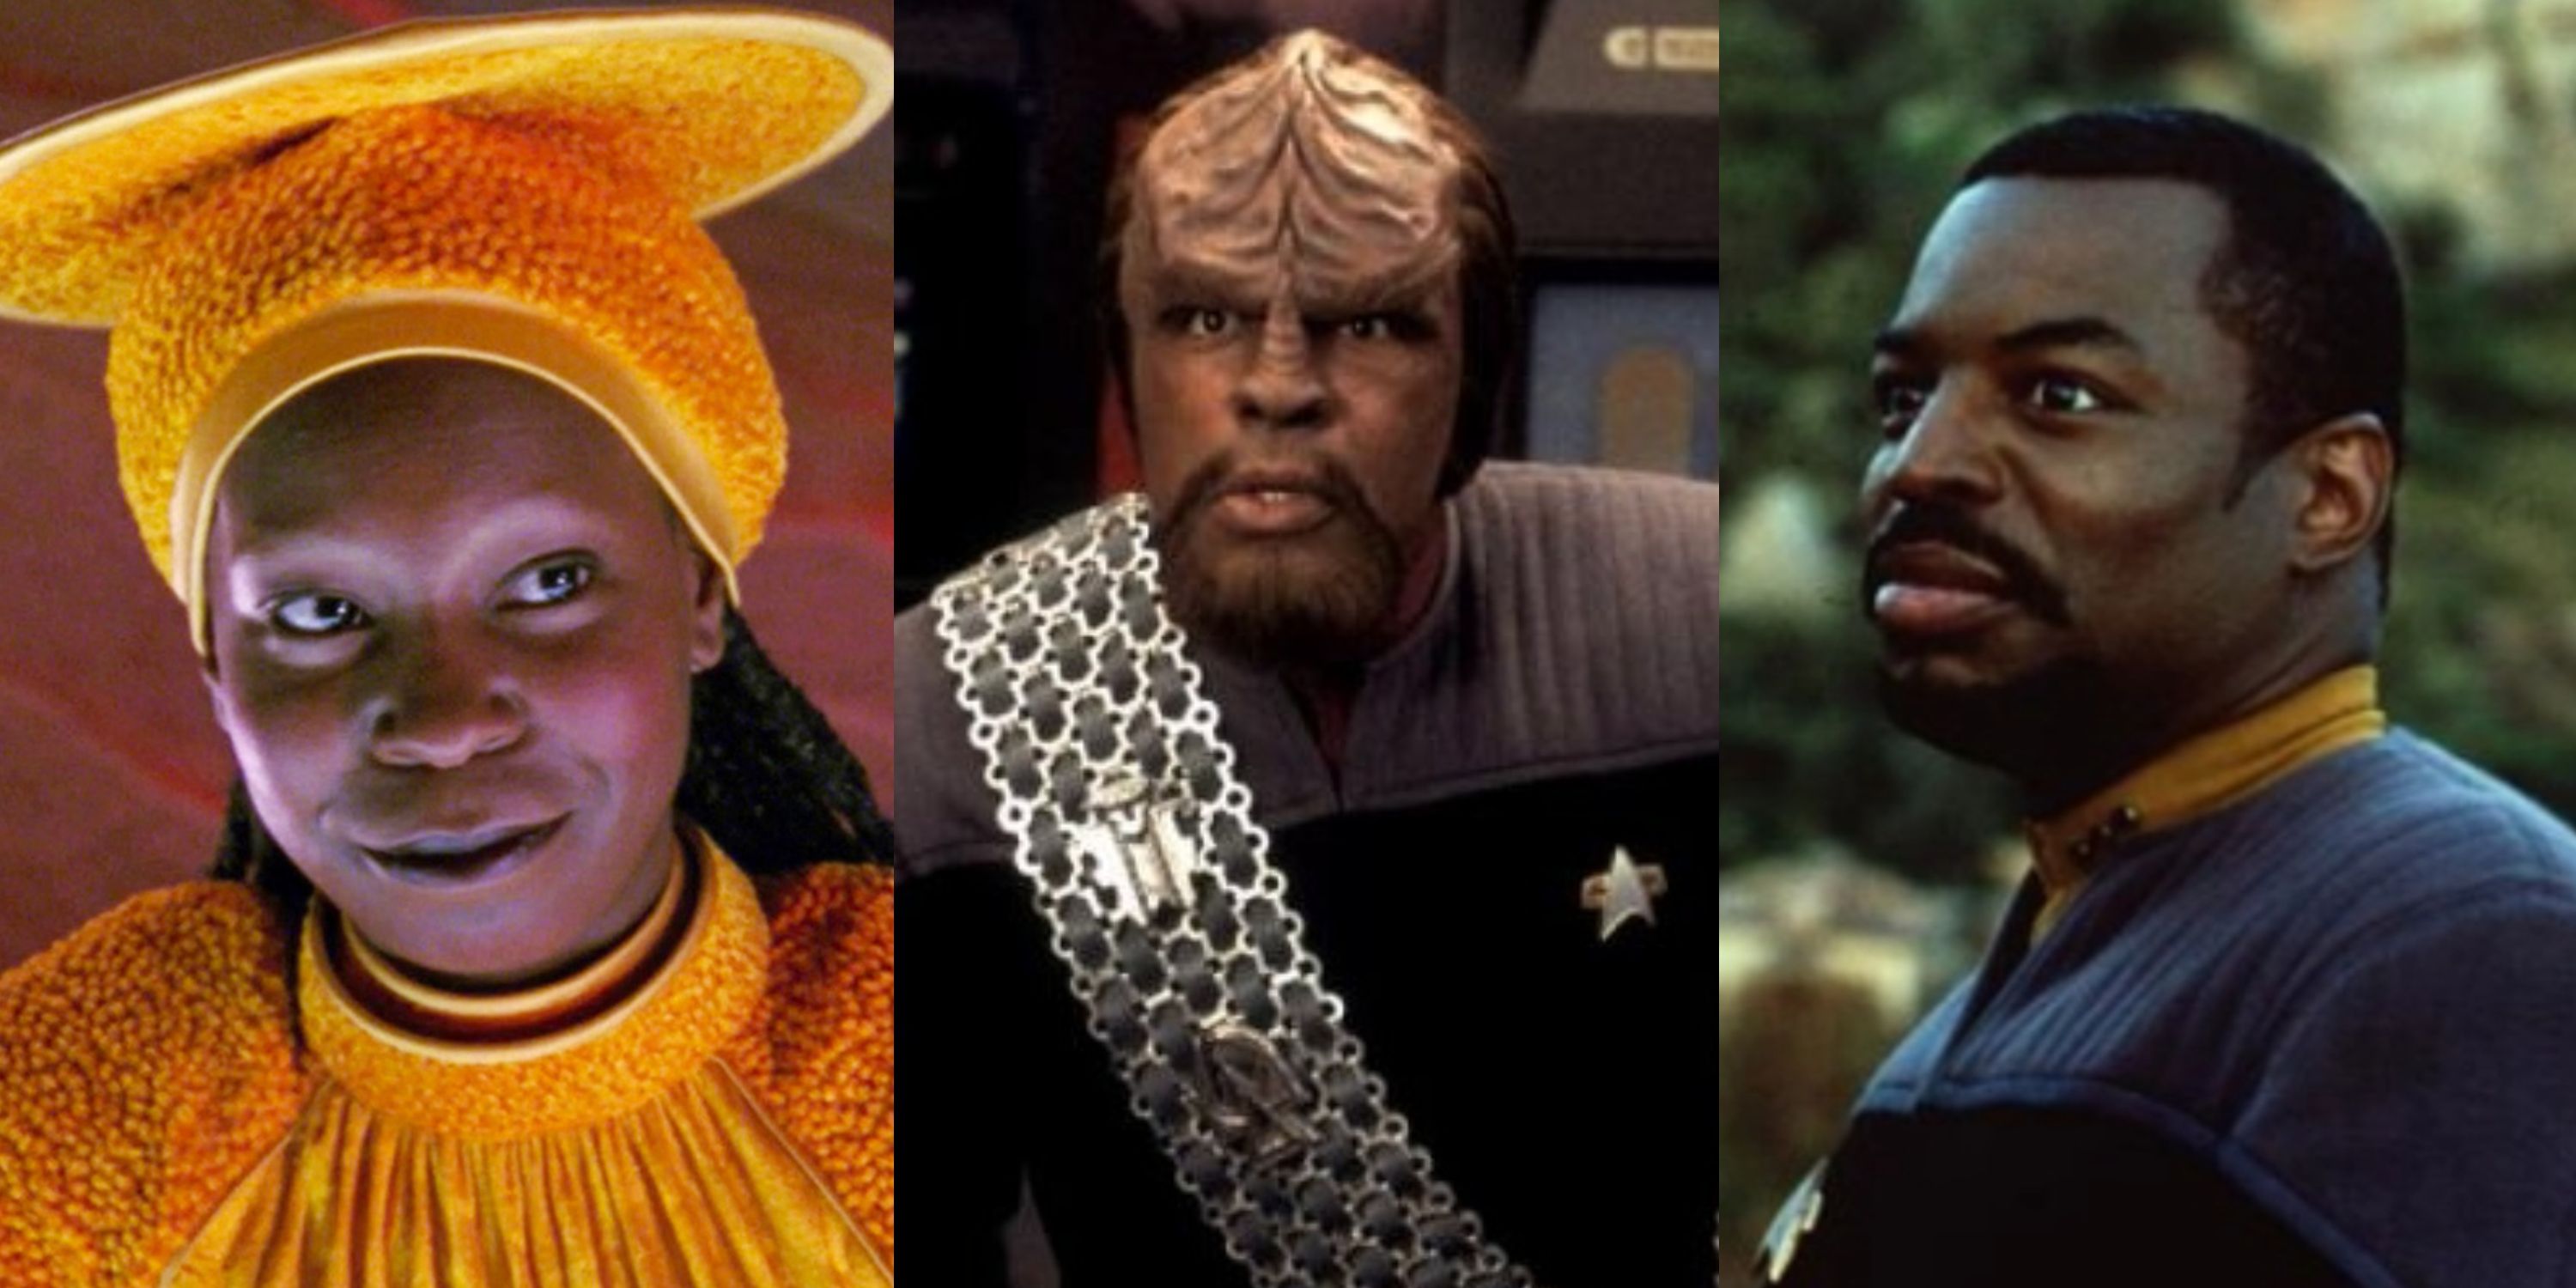 tng characters who would have a better series than picard star trek title image